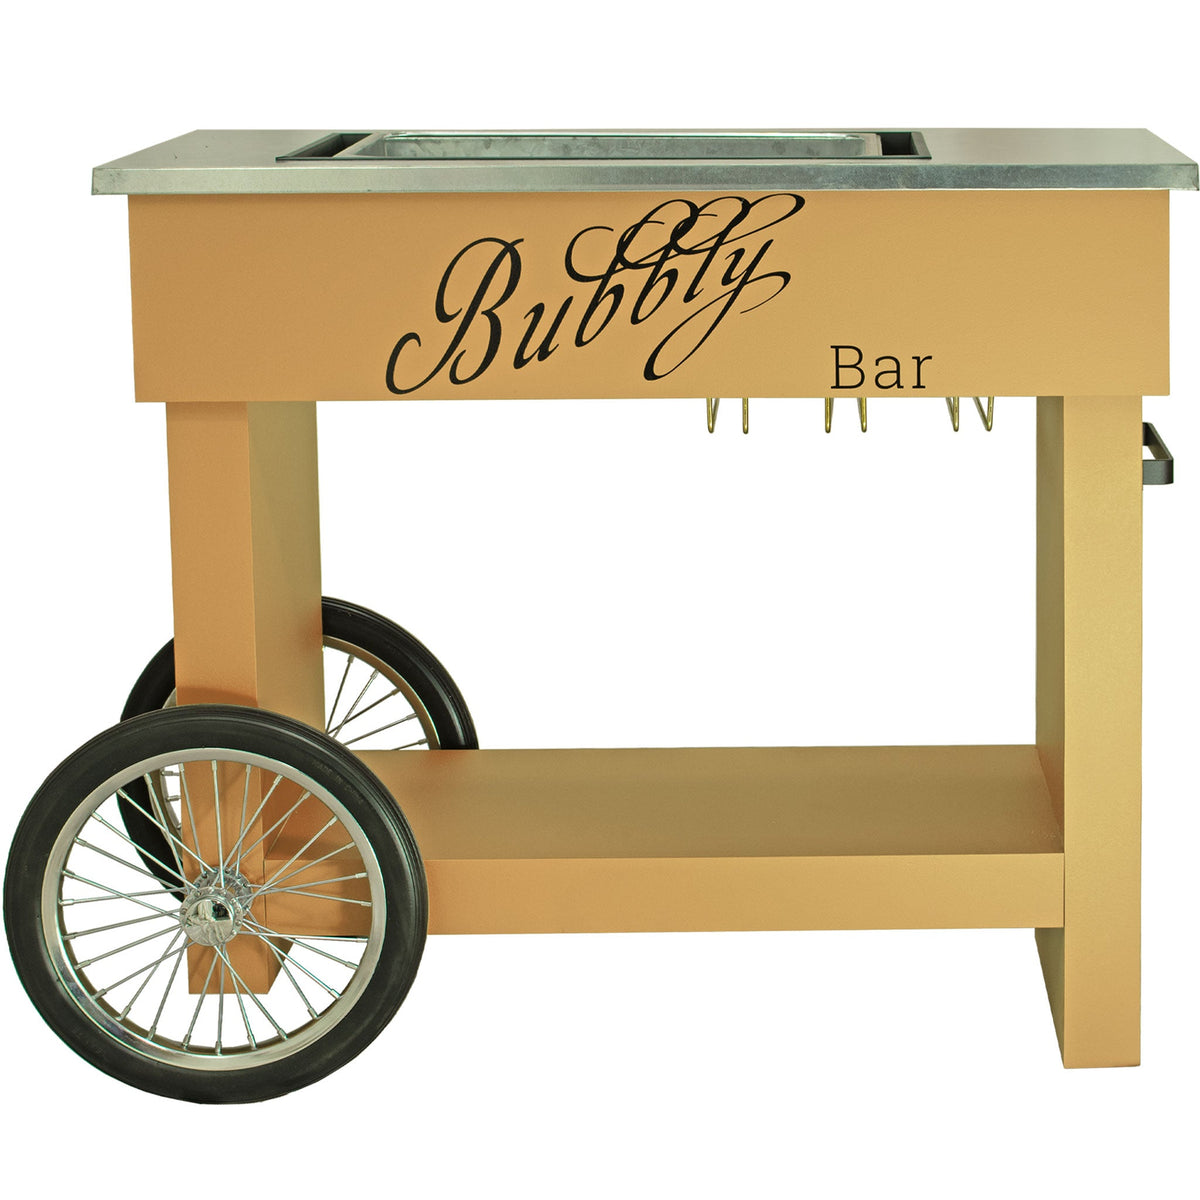 Lee Display's Champagne and Wine Bar Cart with Wheels in Champagne Color and a Bubbly Bar Decal